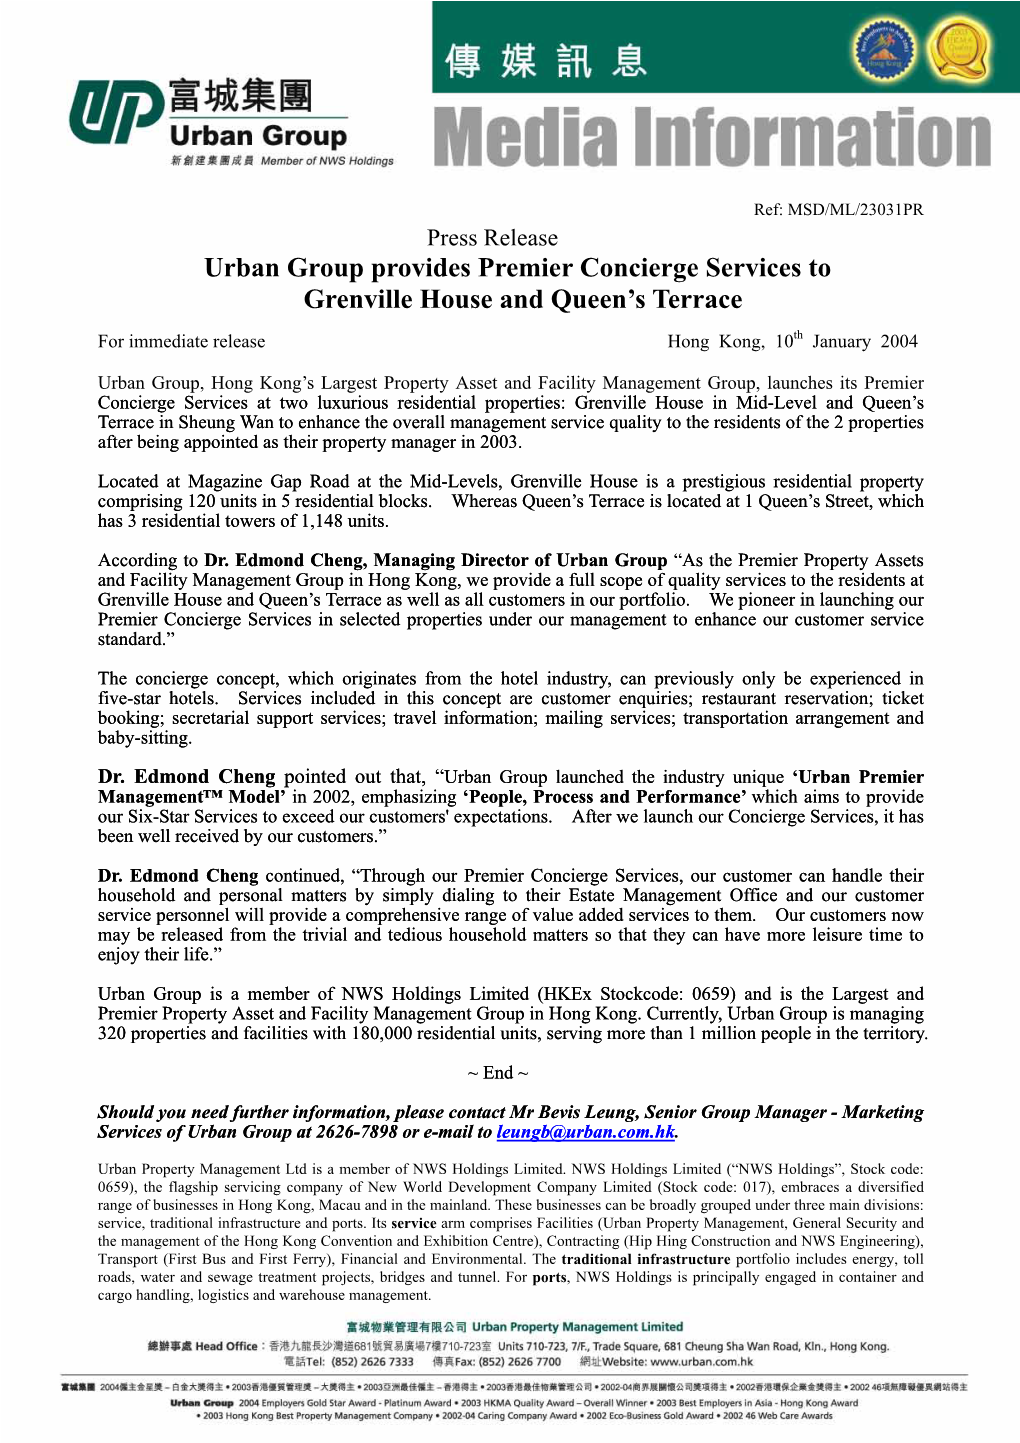 Urban Group Provides Premier Concierge Services to Grenville House and Queen’S Terrace